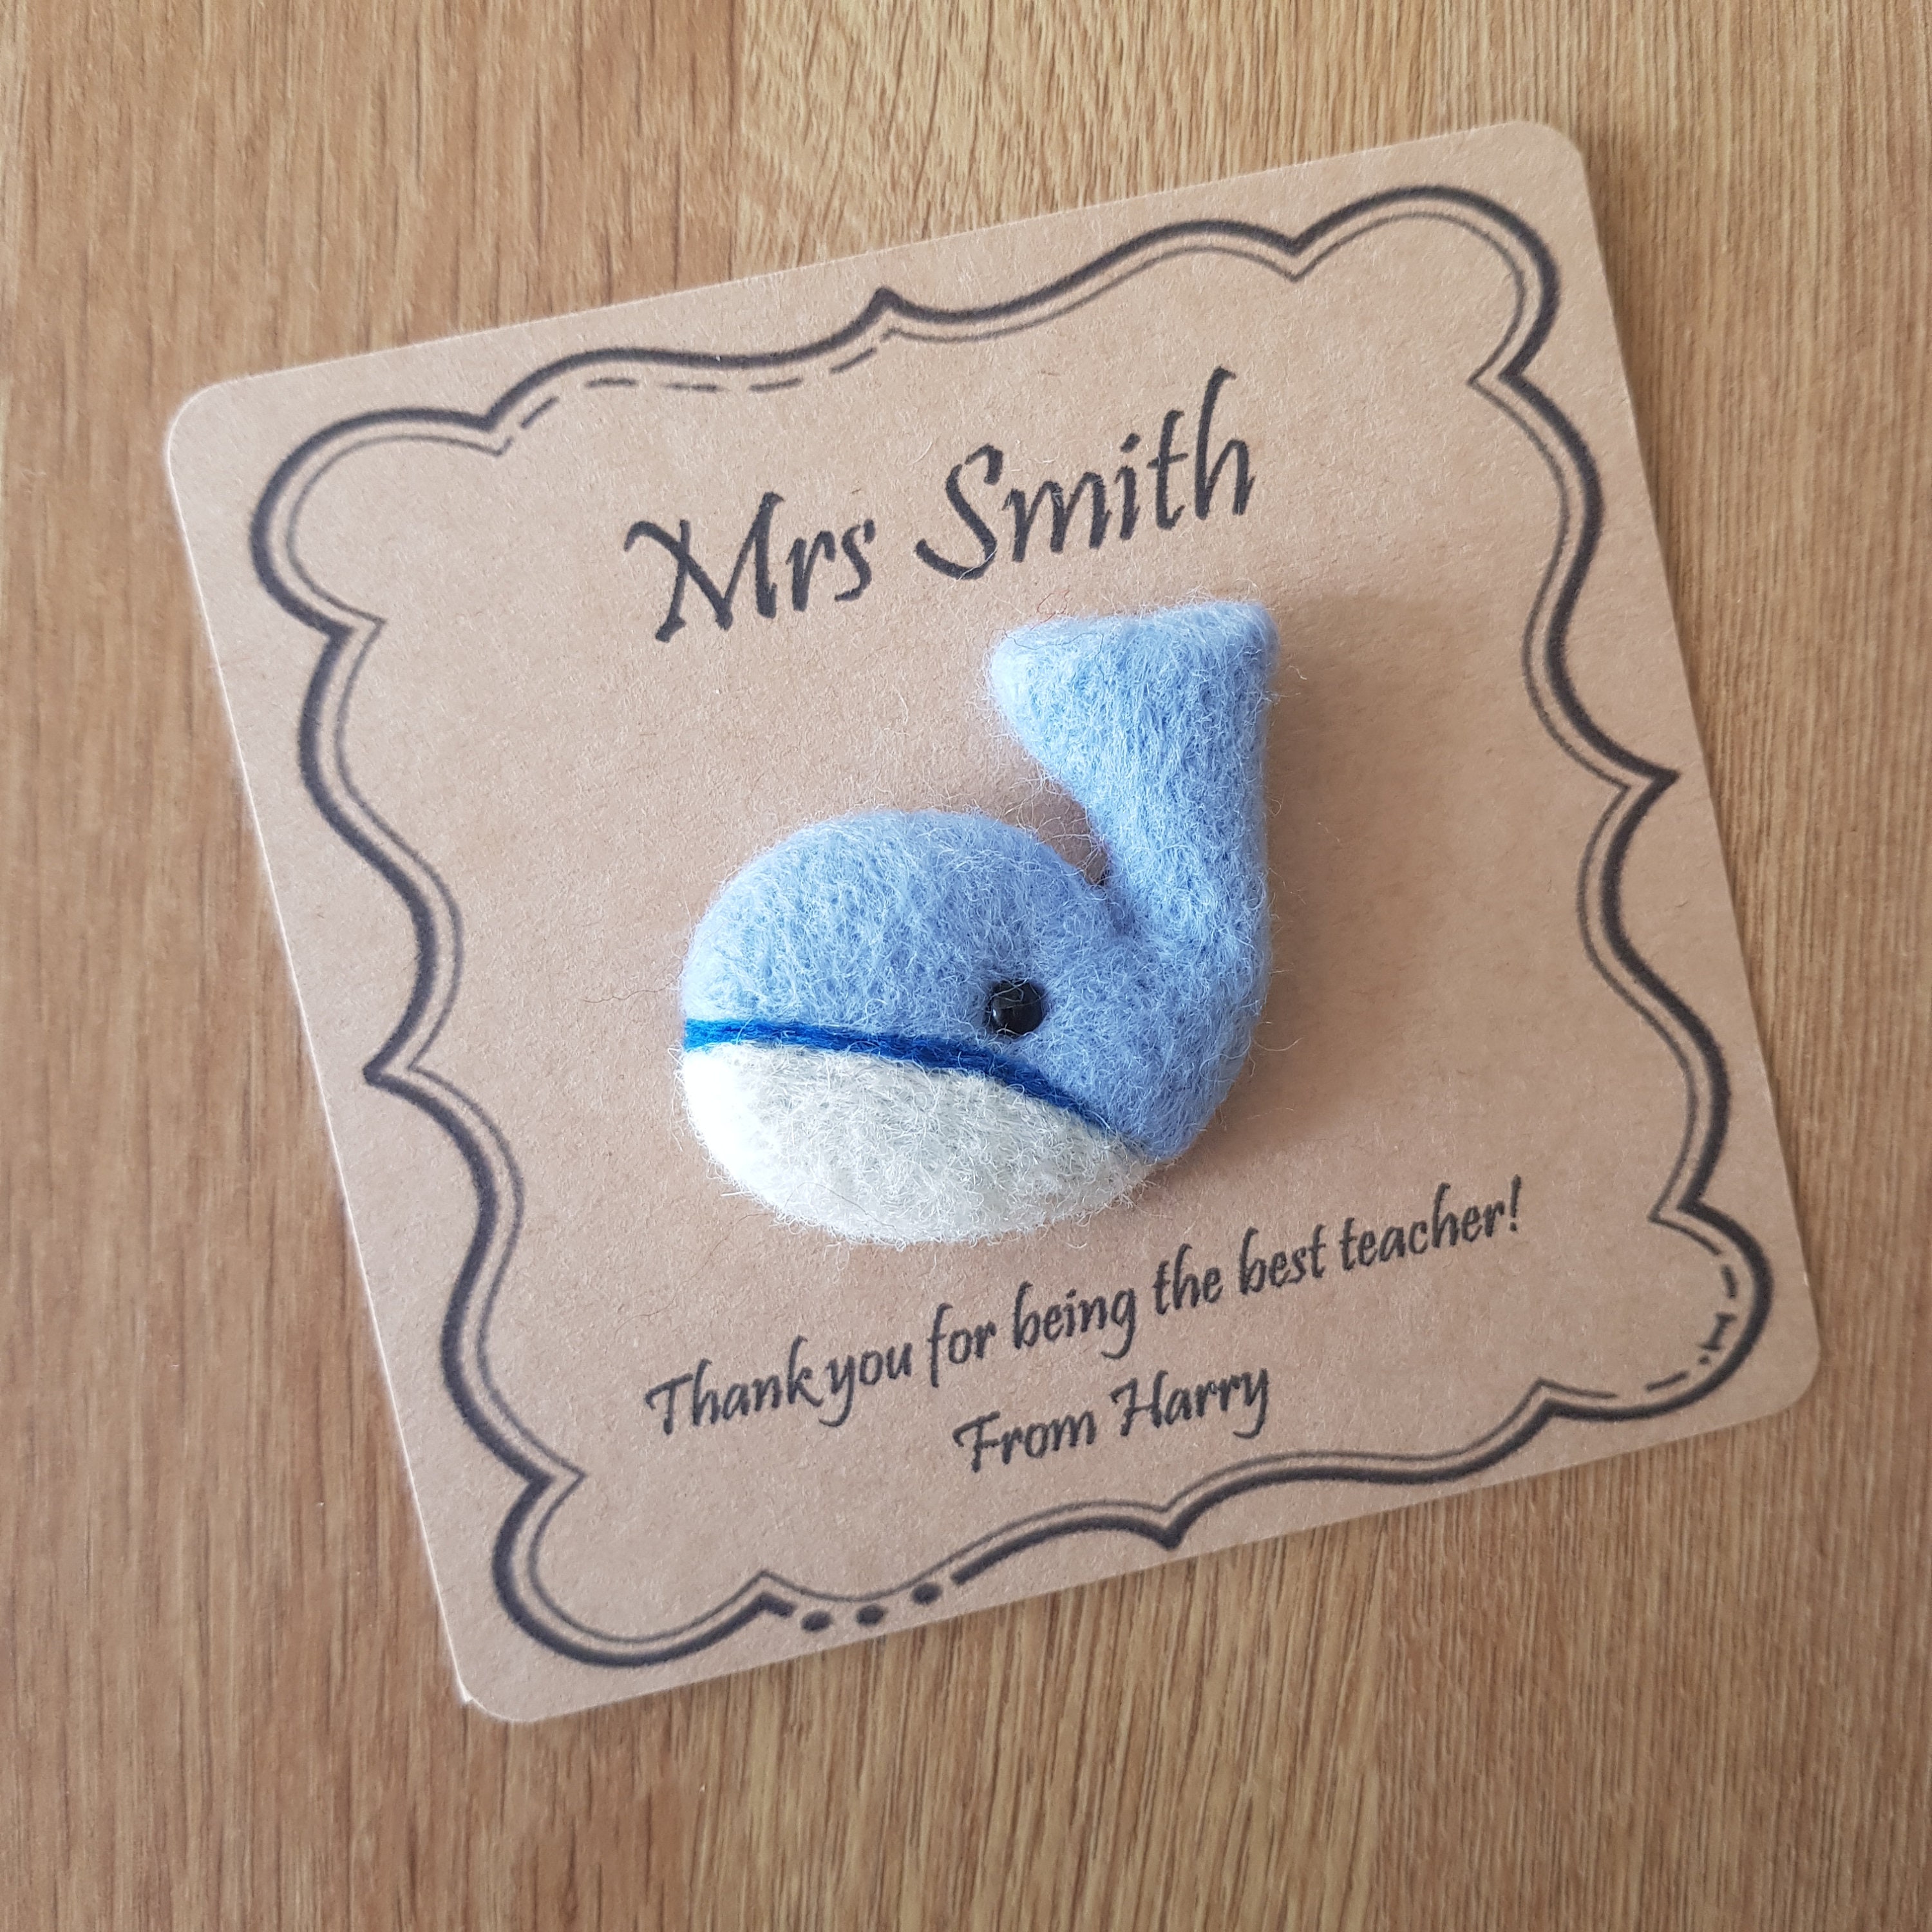 Personalised Gift Needle Felted Whale Brooch Handmade in Blue & White Wool